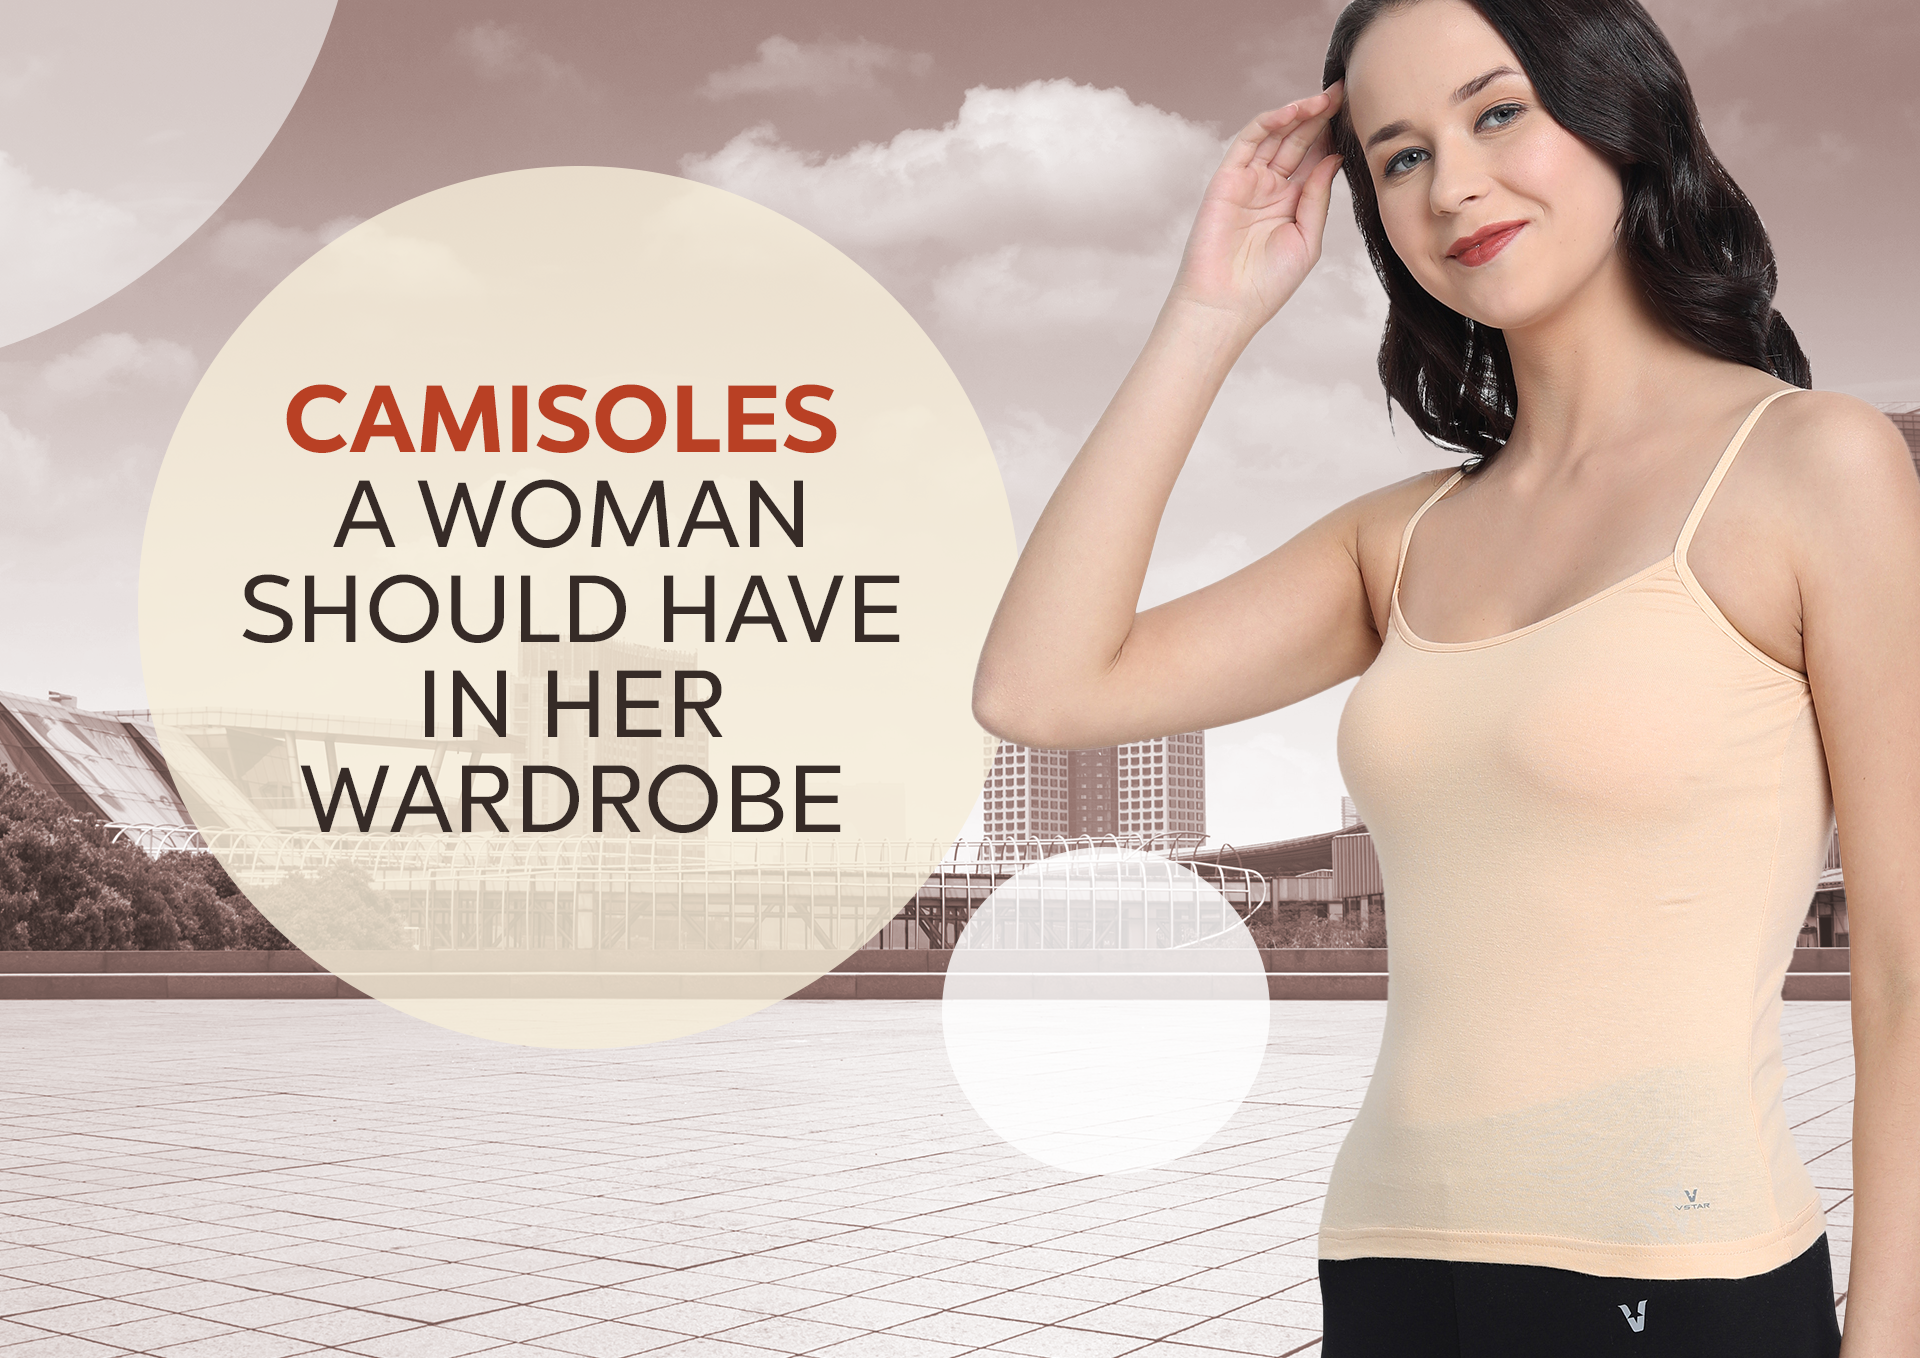 Women's Padded Shapewear Camisole Top New FREE SHIPPING!